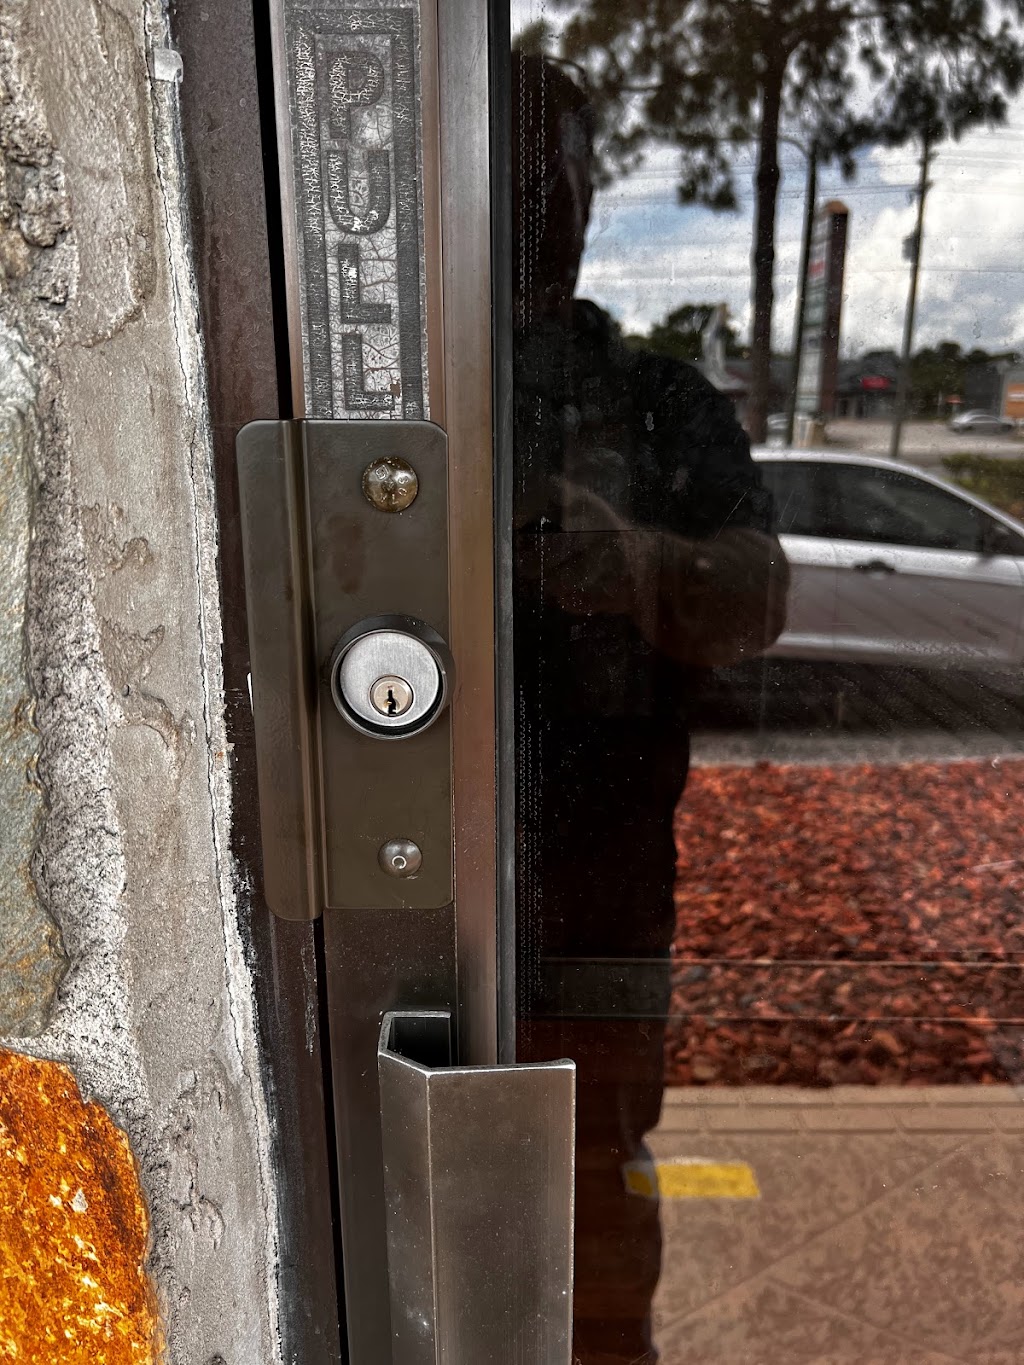 SPRING HILL LOCK AND KEY INC. | The Abbey Plaza, 11217 Spring Hill Dr, Spring Hill, FL 34609 | Phone: (352) 686-3855